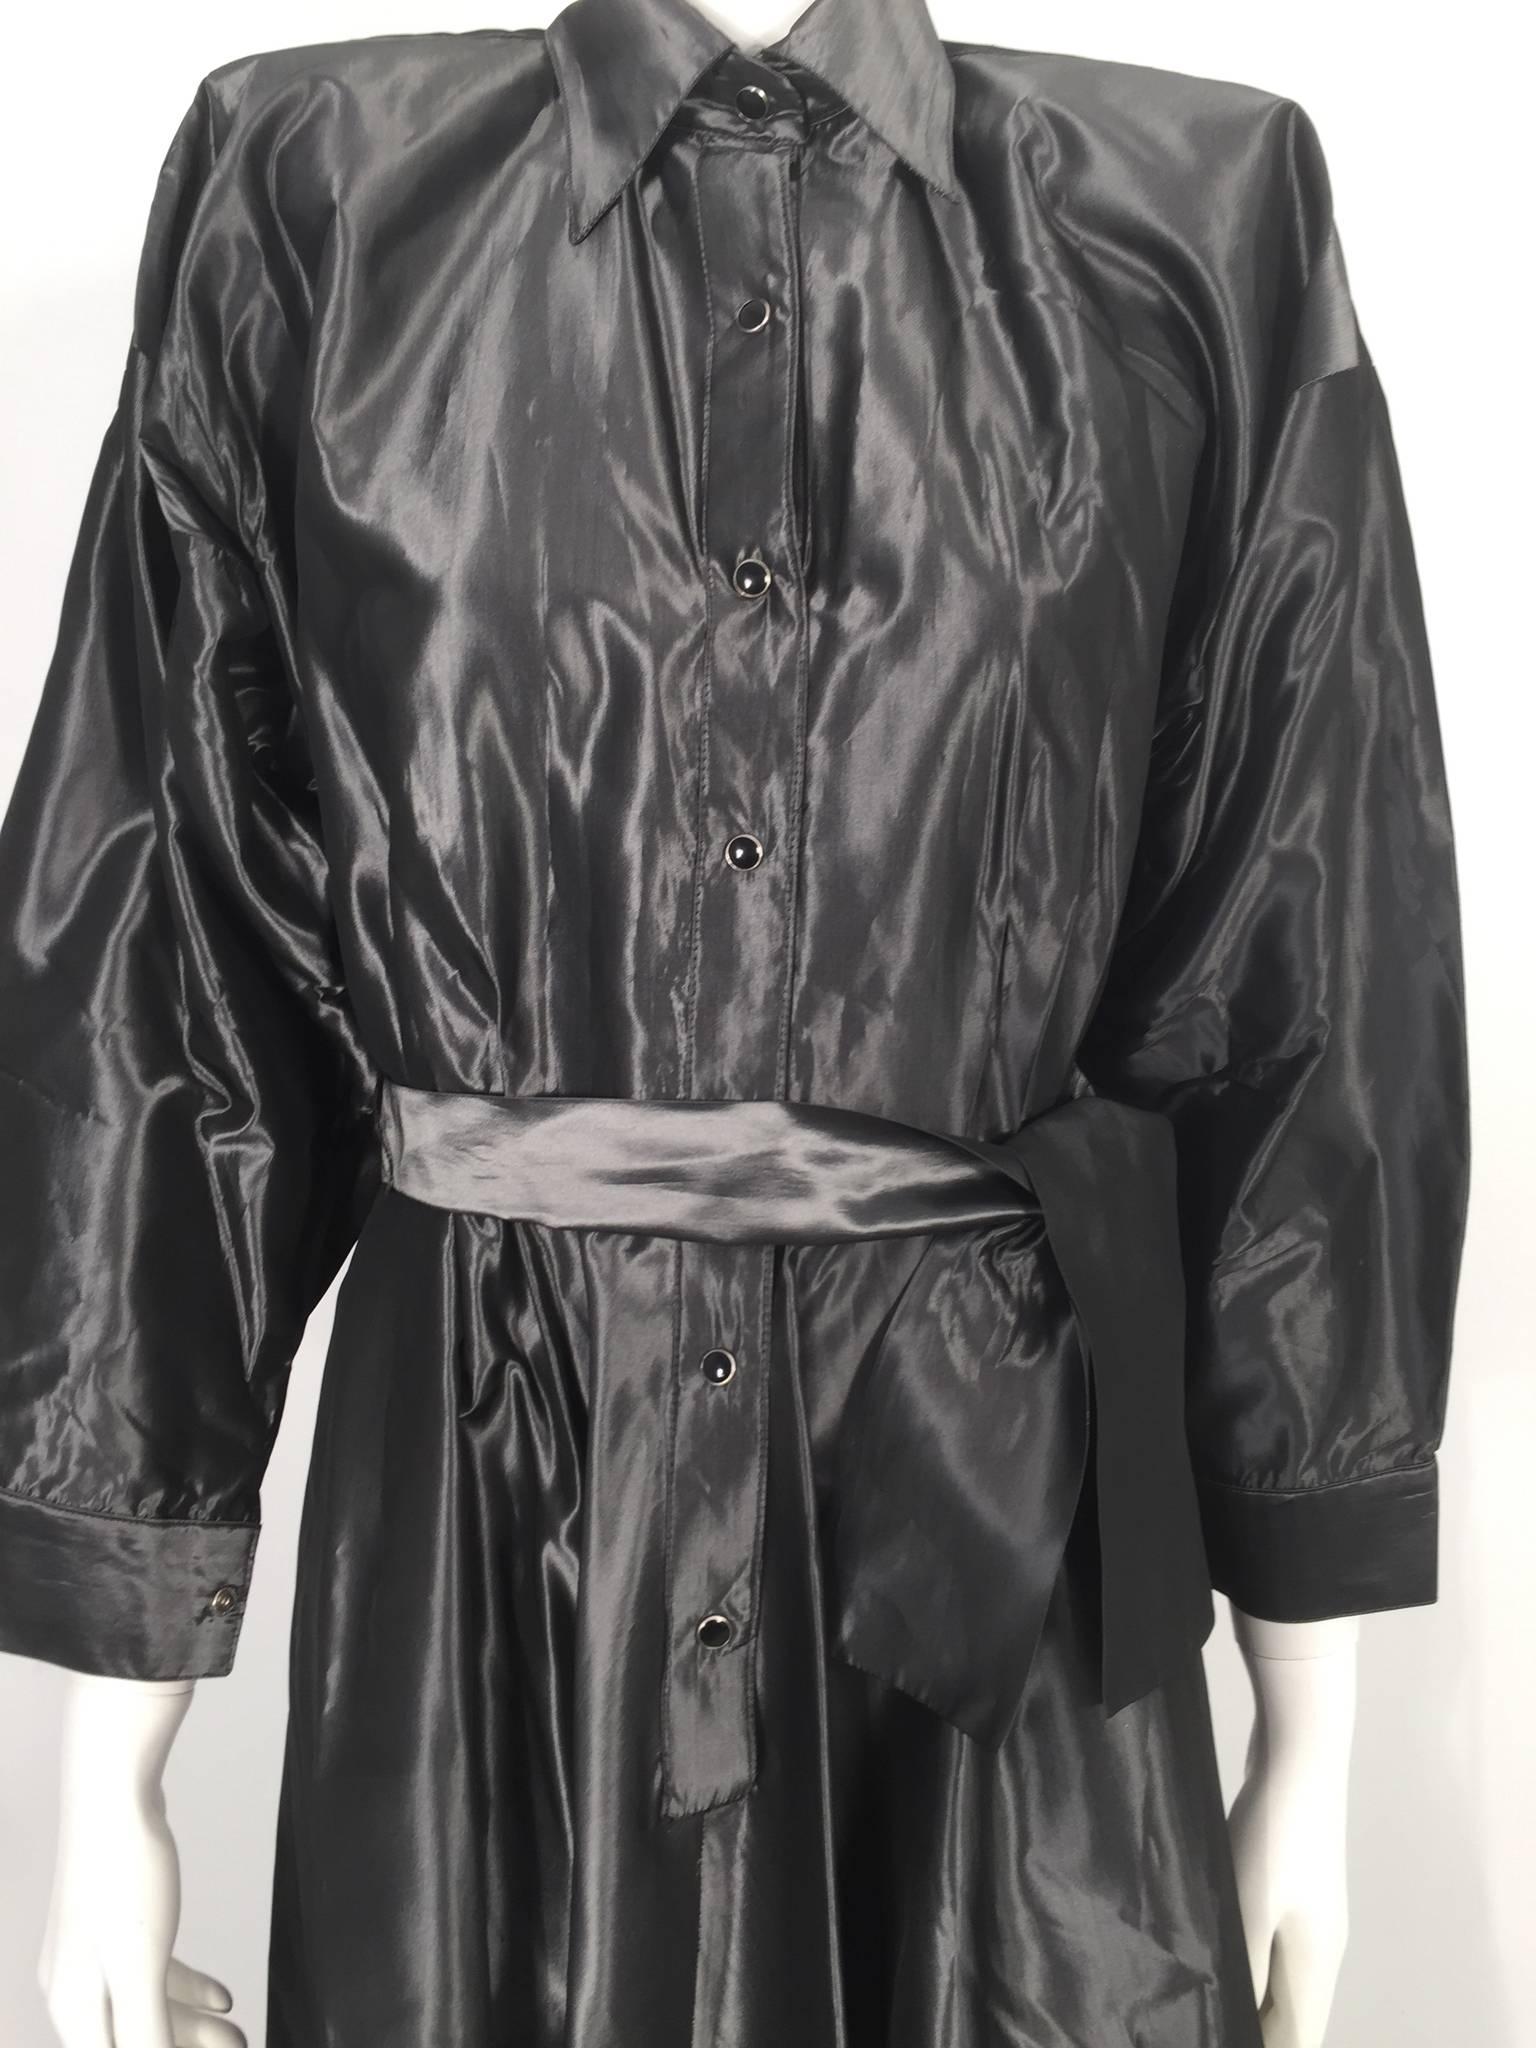 Norma Kamali 1980's metallic trench coat features a unique sheen water repellant fabric made of cotton, polyester and rayon. The sleeves are 20'' and the trench coat includes a detachable belt.

For International orders, please contact us for a